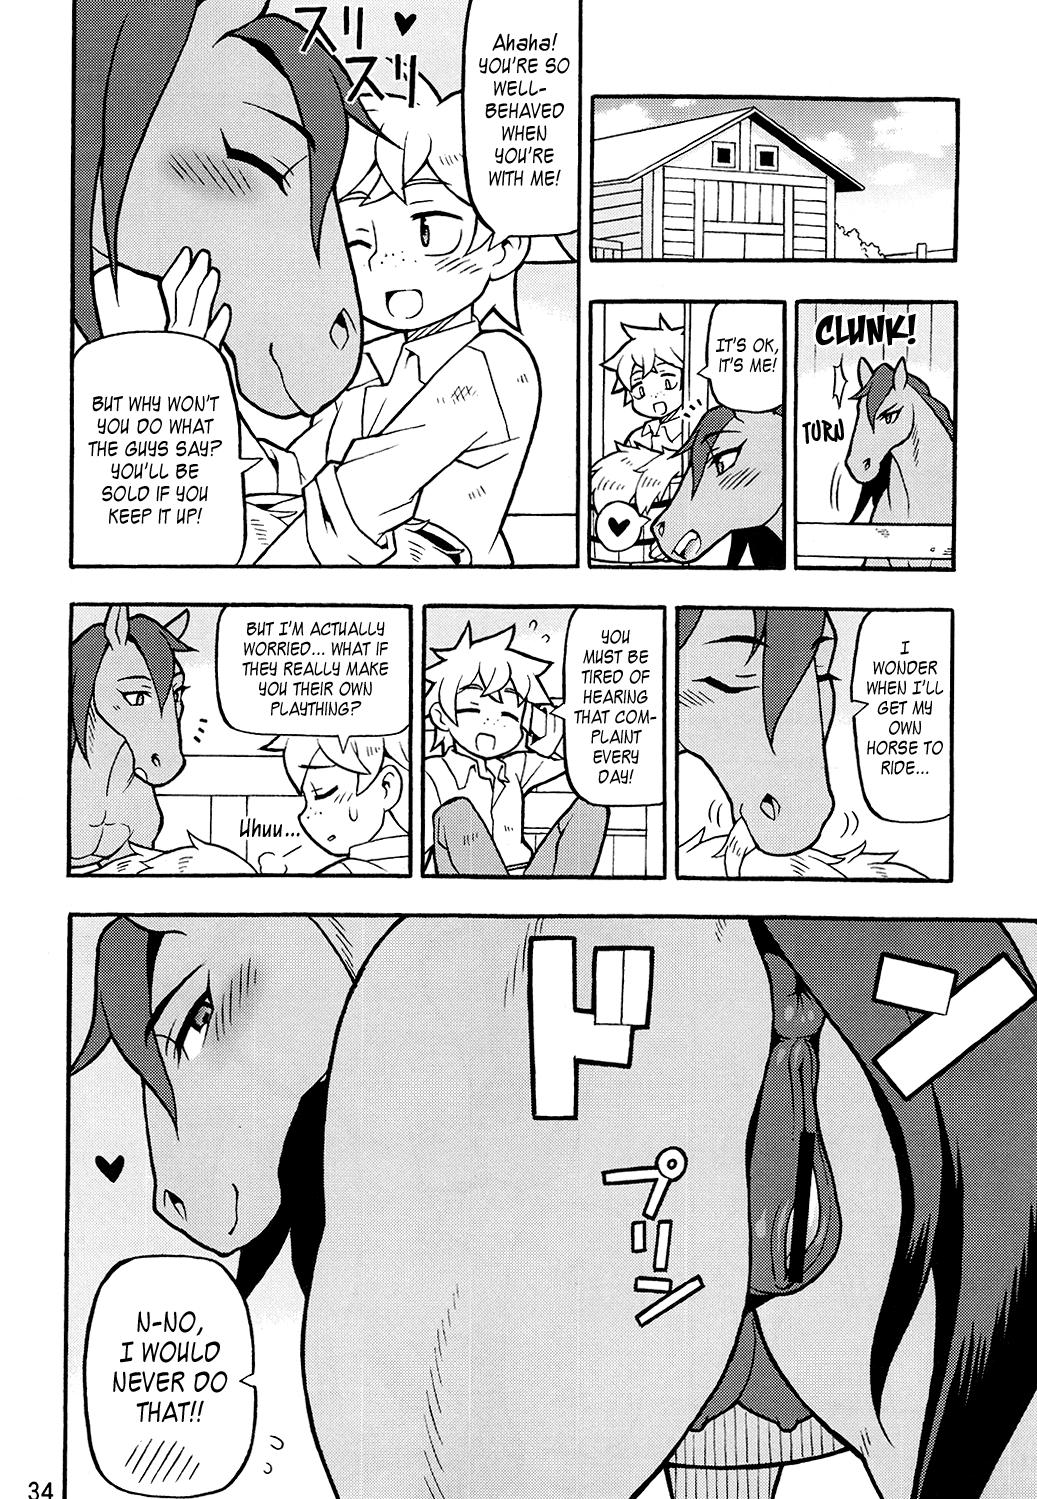 Hot Naked Girl Mare Holic 4 Kemolover EX Ch. 4, 8, 10-11, 19 Pawg - Page 4